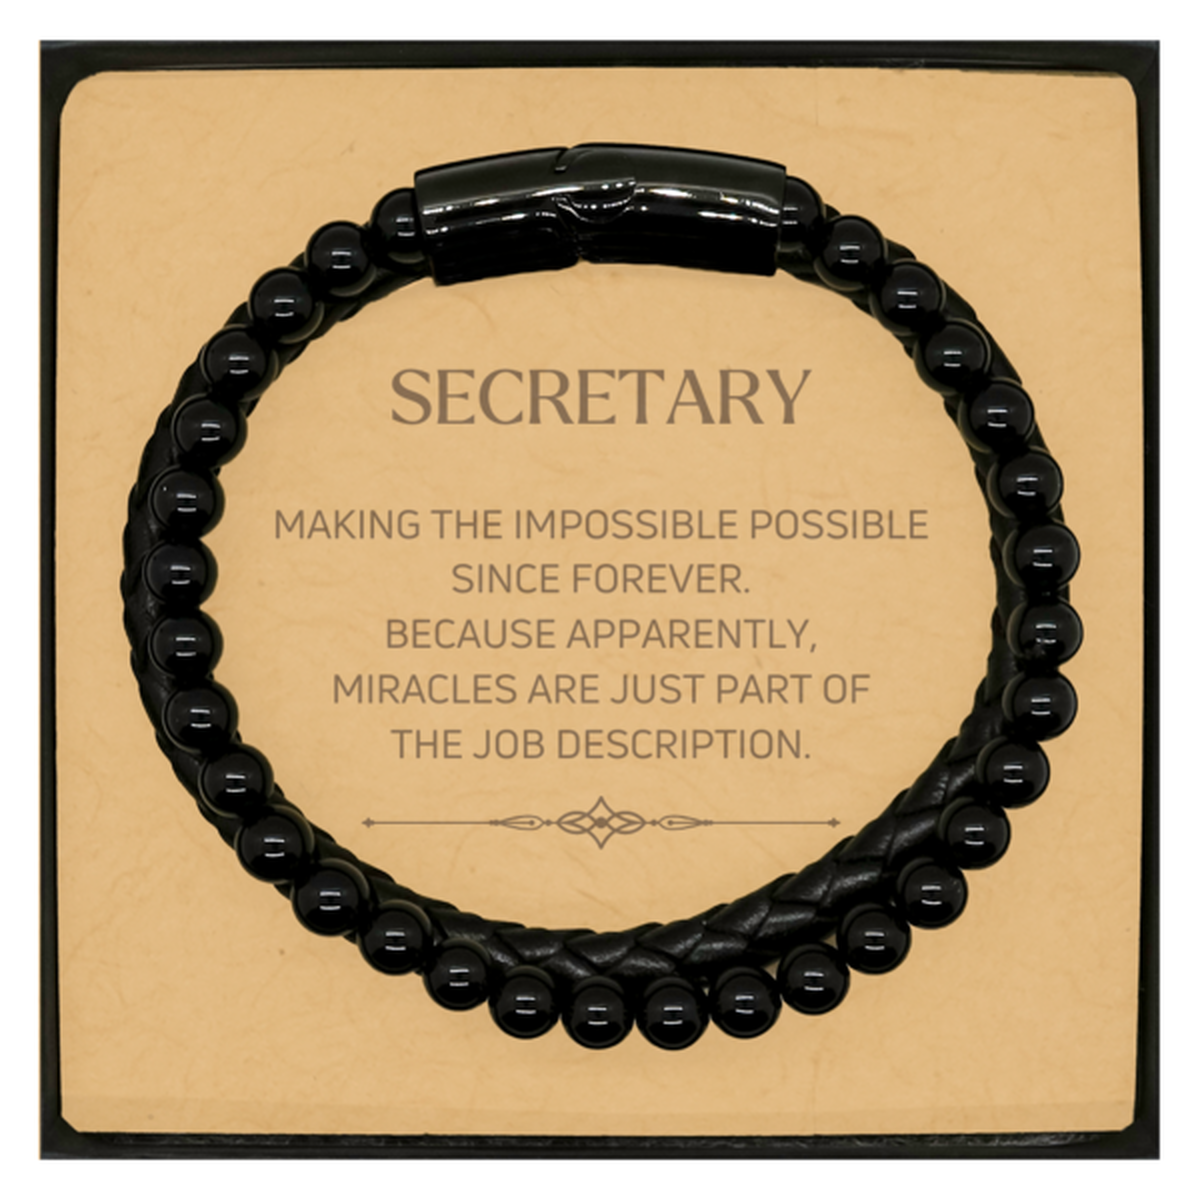 Funny Secretary Gifts, Miracles are just part of the job description, Inspirational Birthday Christmas Stone Leather Bracelets For Secretary, Men, Women, Coworkers, Friends, Boss